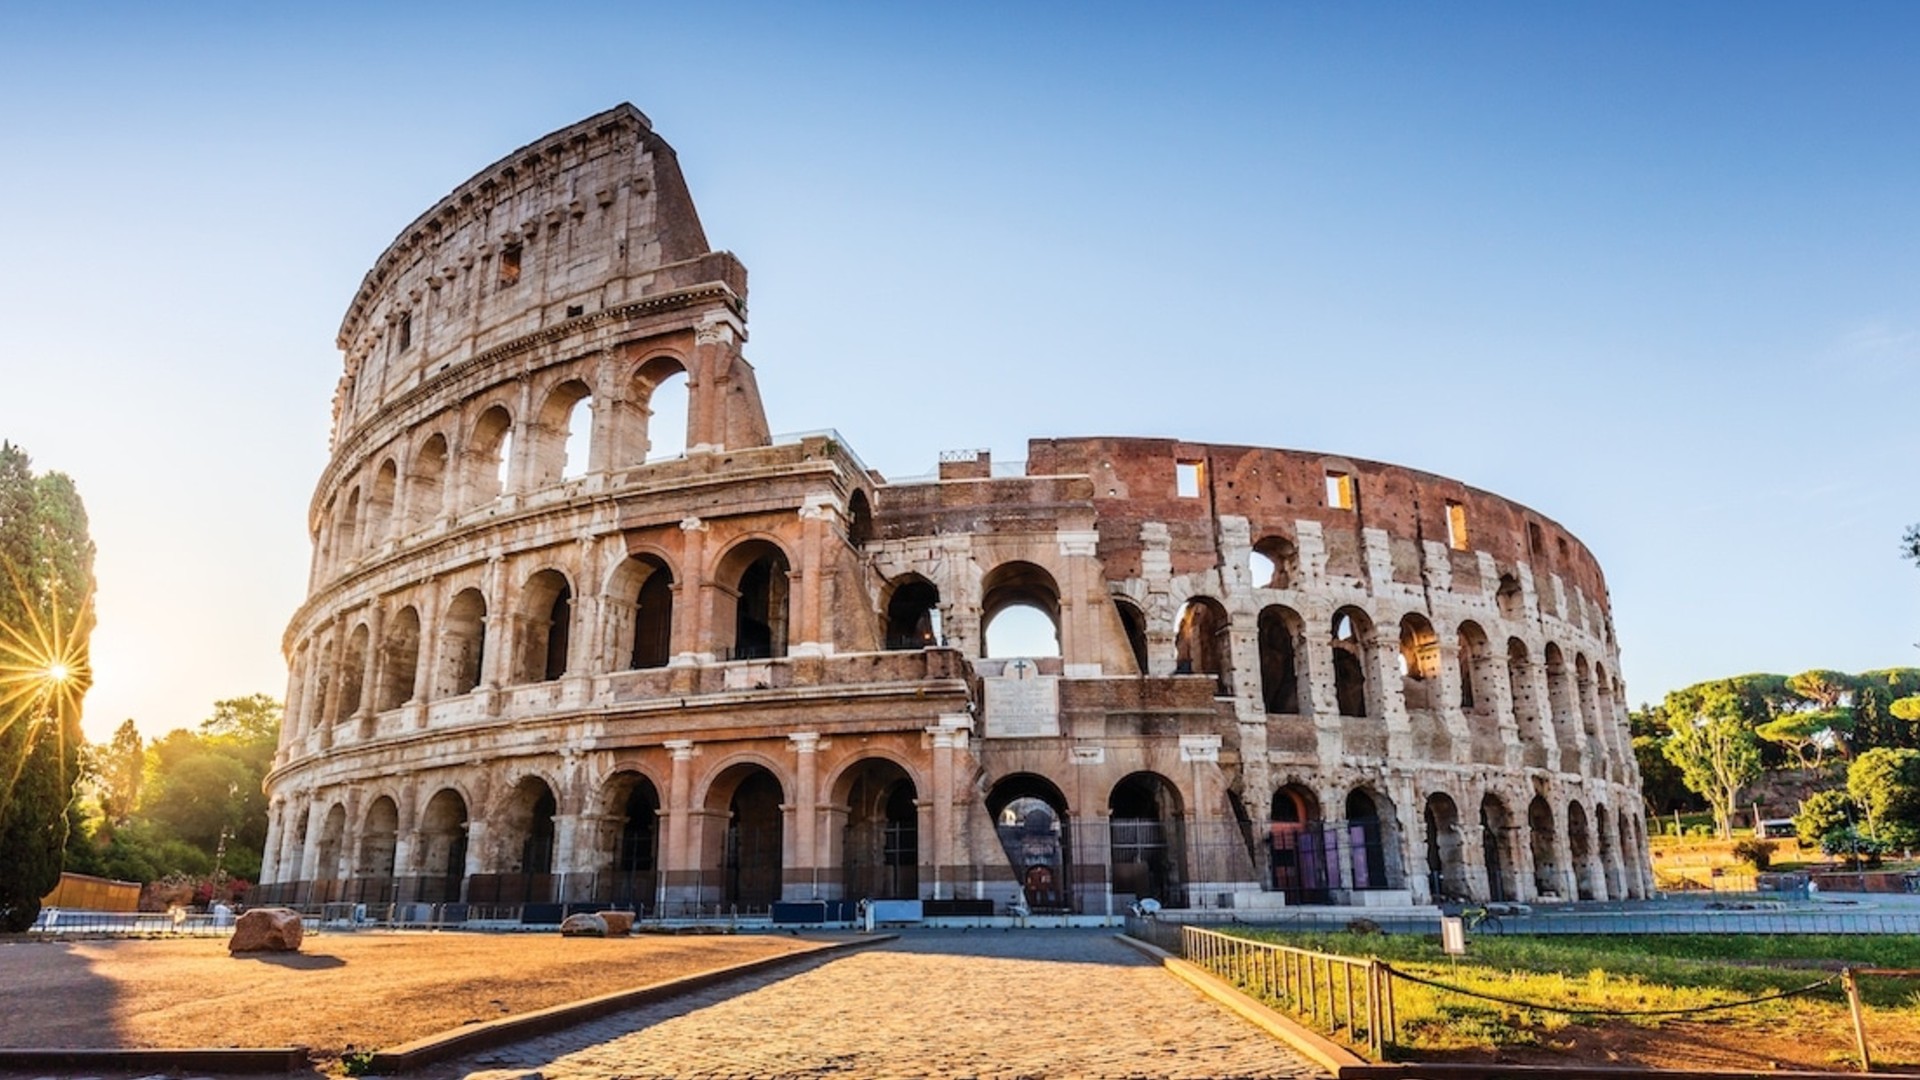 The Colosseum in Rome has Finally Reopened after undergoing Major Renovations